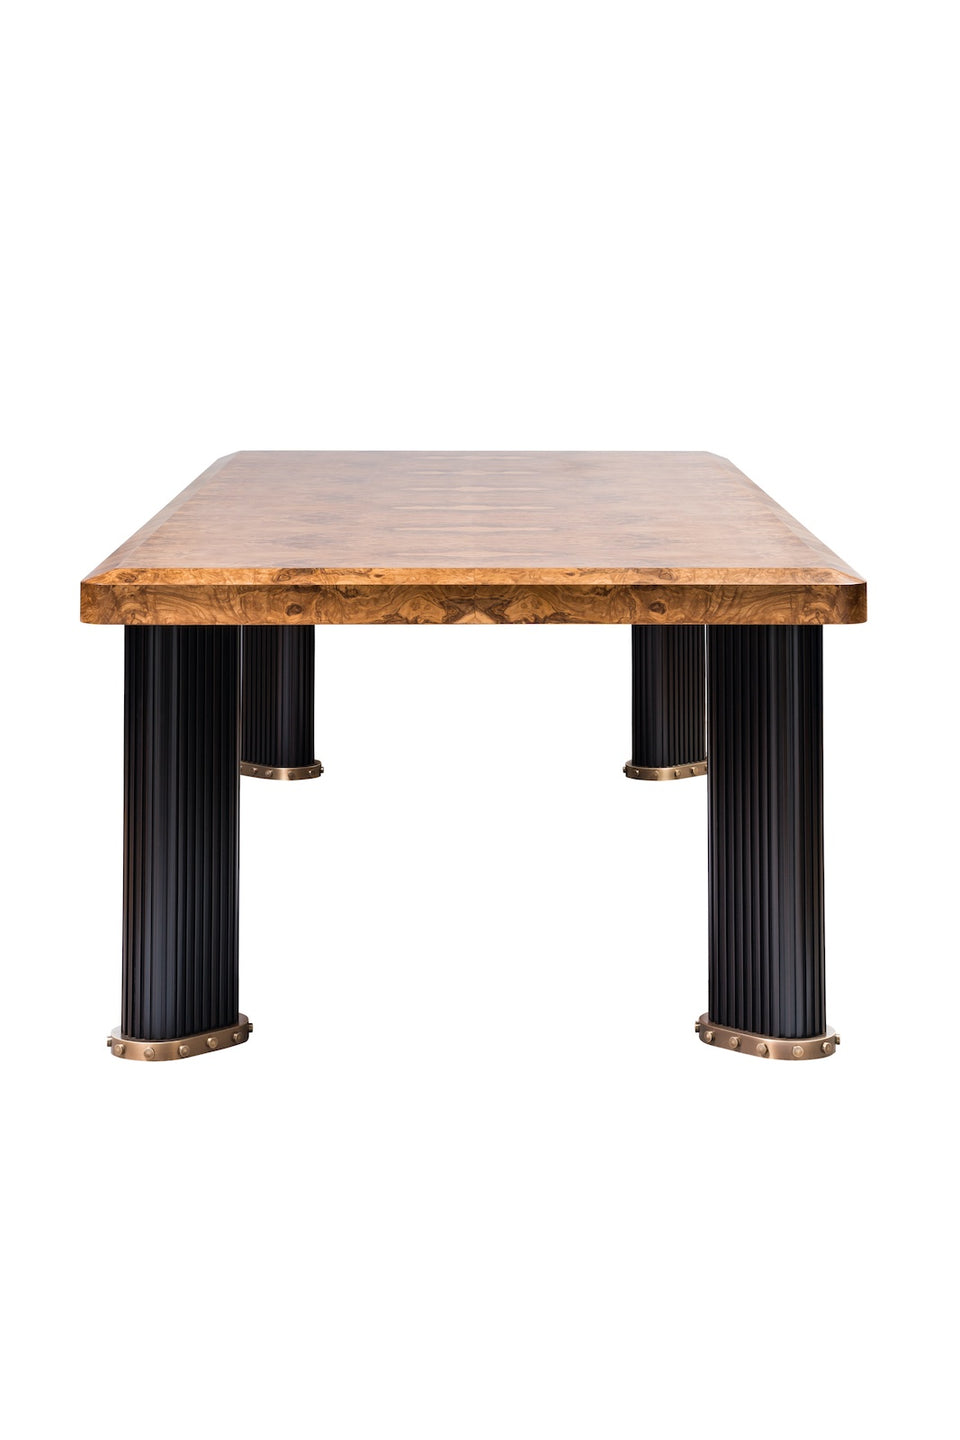 22313 DINING TABLE